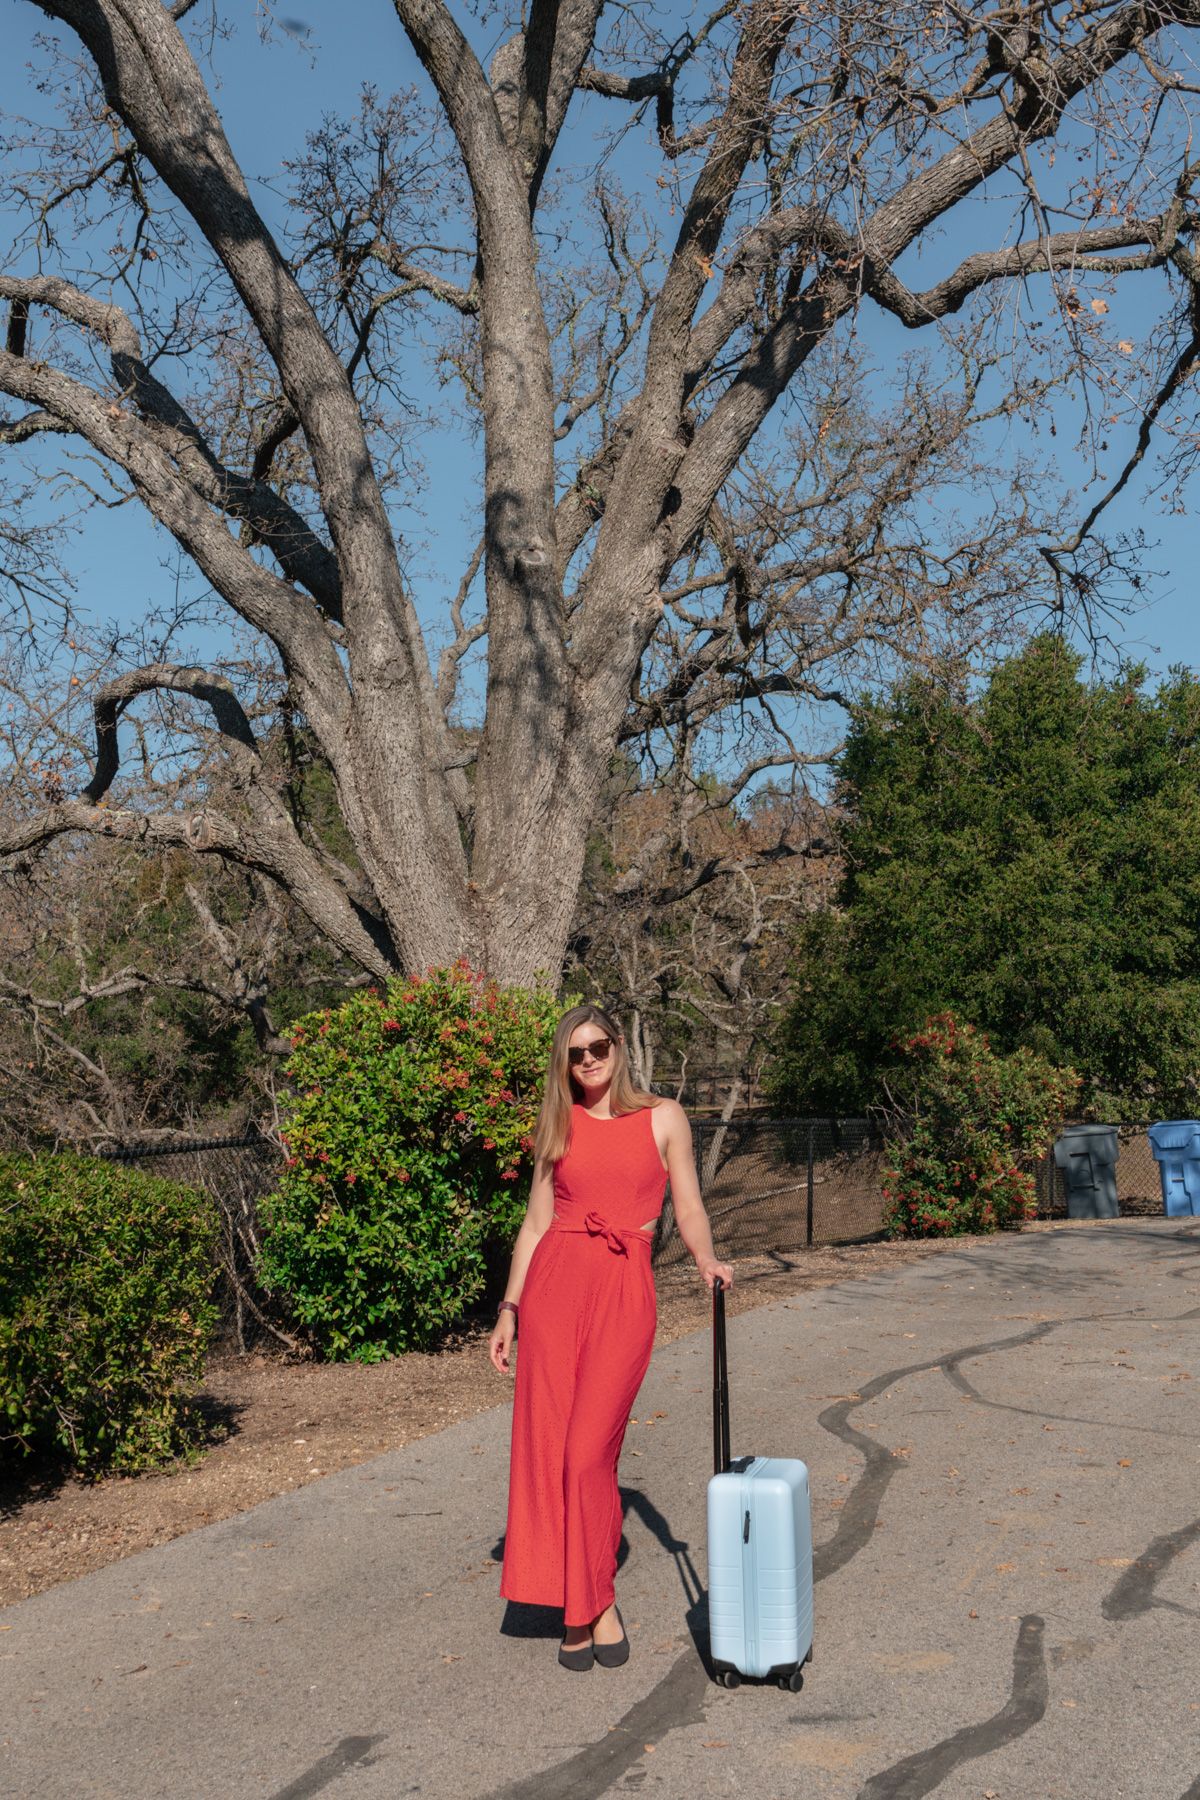 Woman in red dress and sunglasses holding a light blue hardshell suitcase outdoors with trees and a clear blue sky in the background.